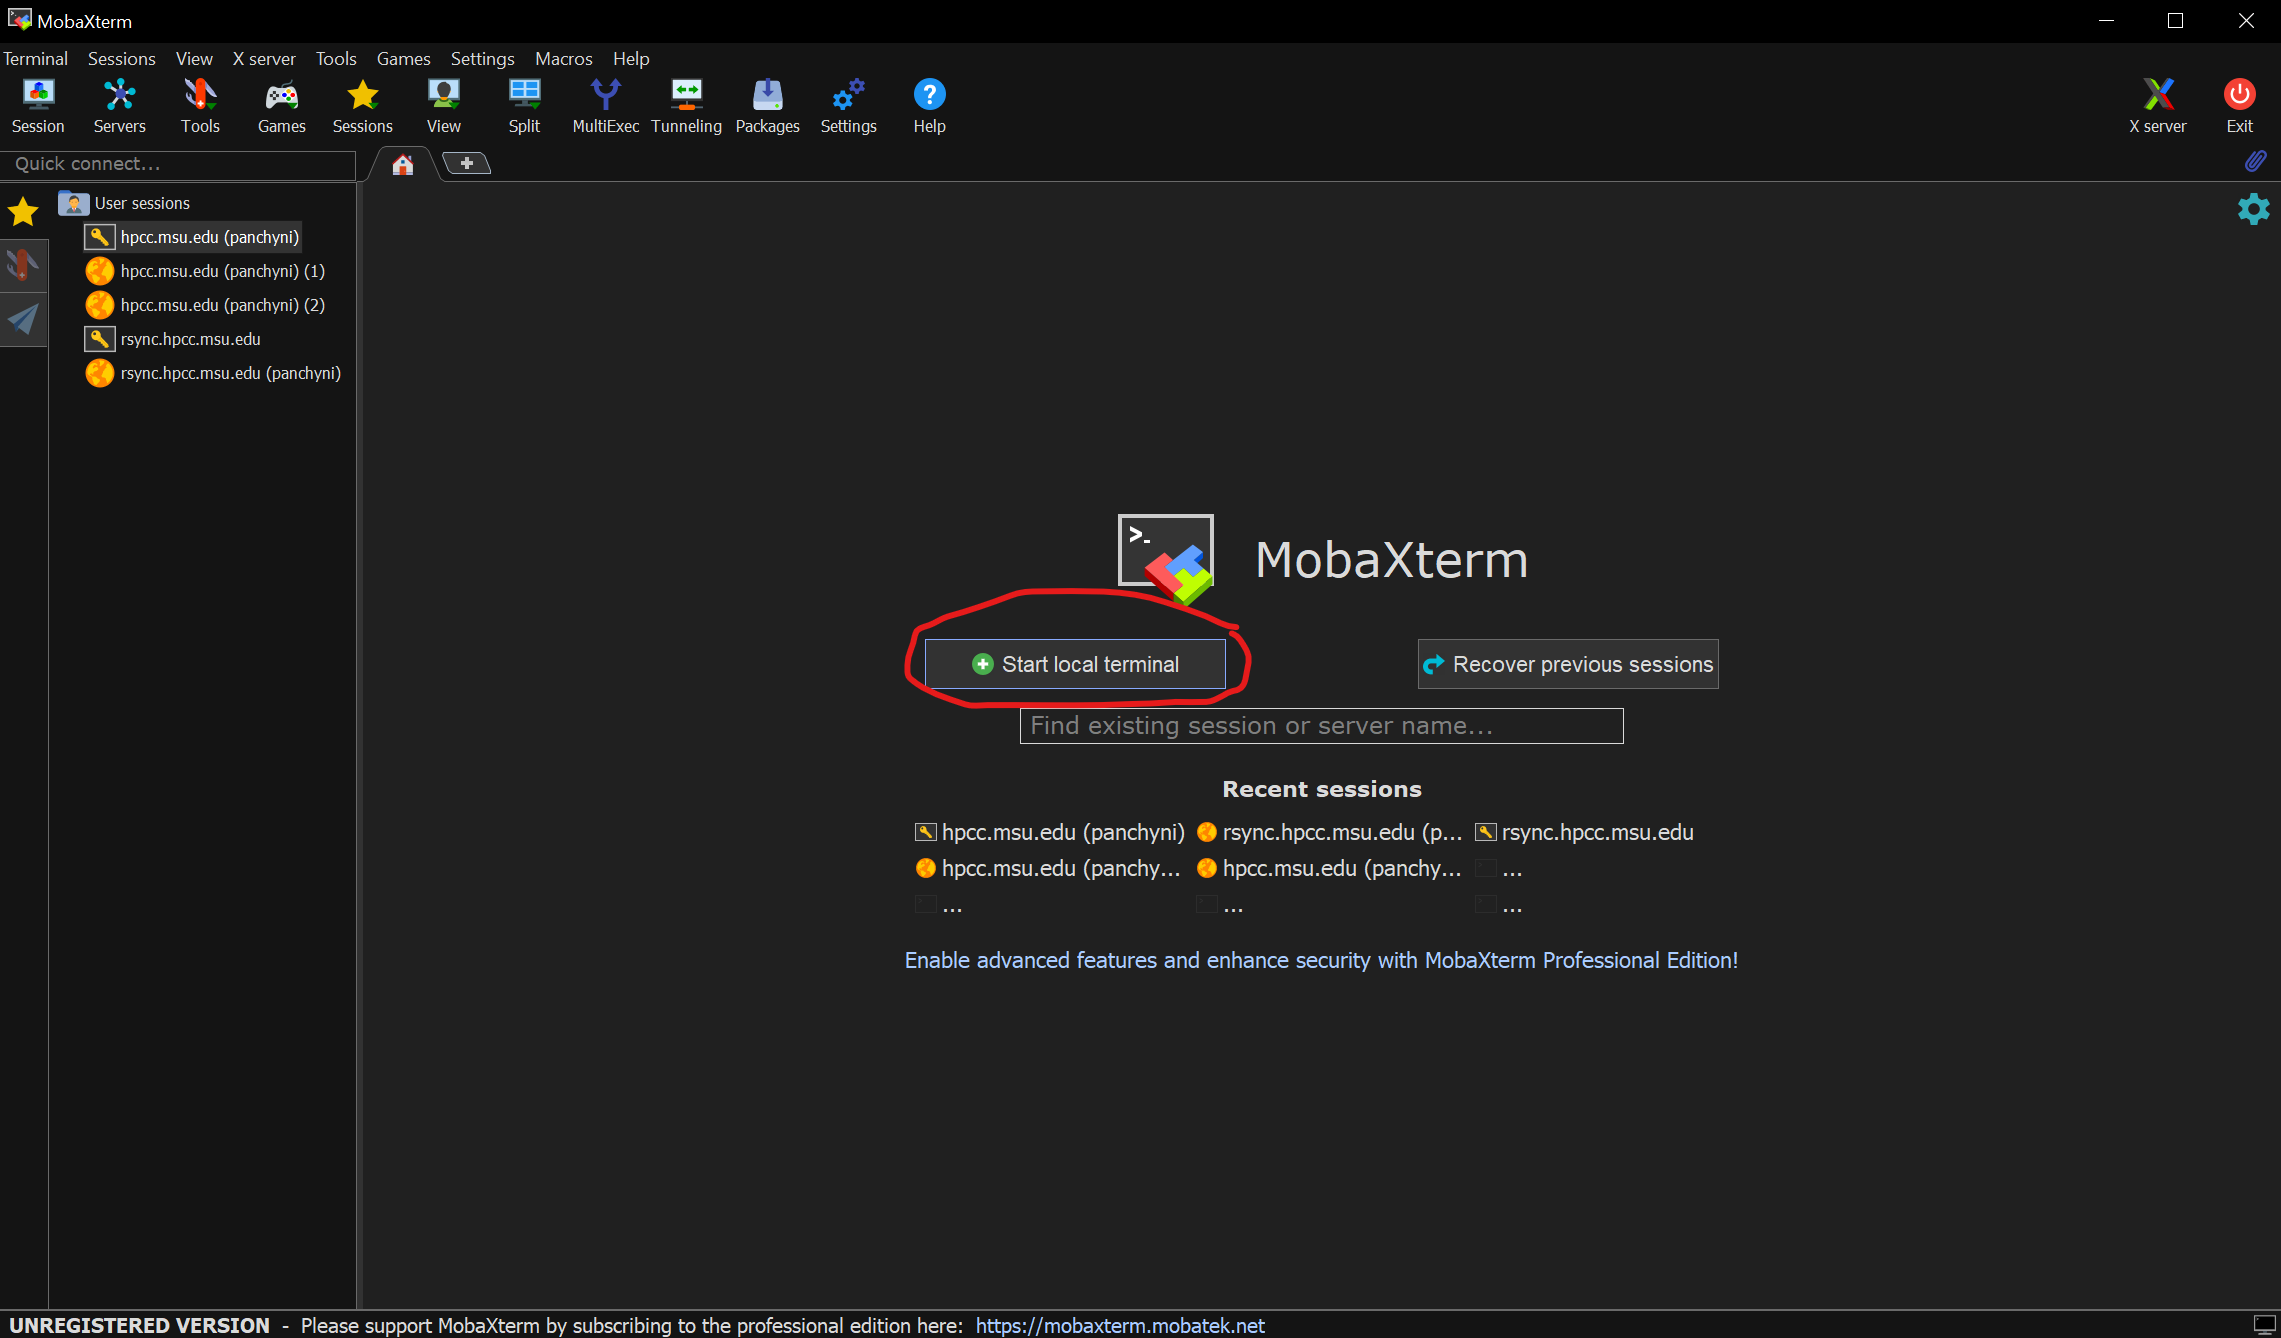 Screenshot of the MobaXTerm start tab with the Start Local Terminal button circled